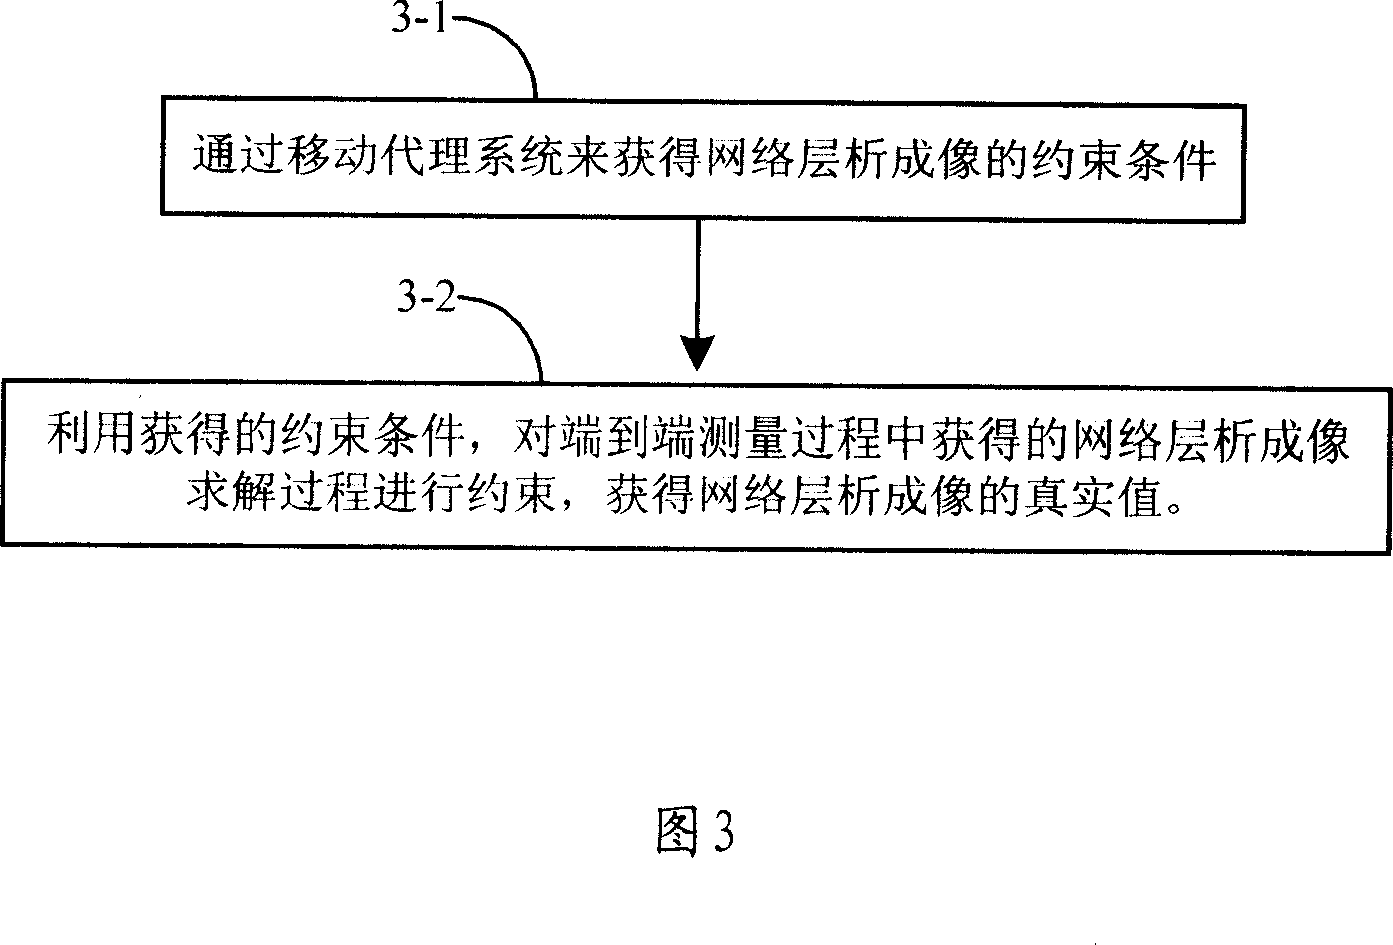 Mobile proxy system and method for constraining network chromatography image